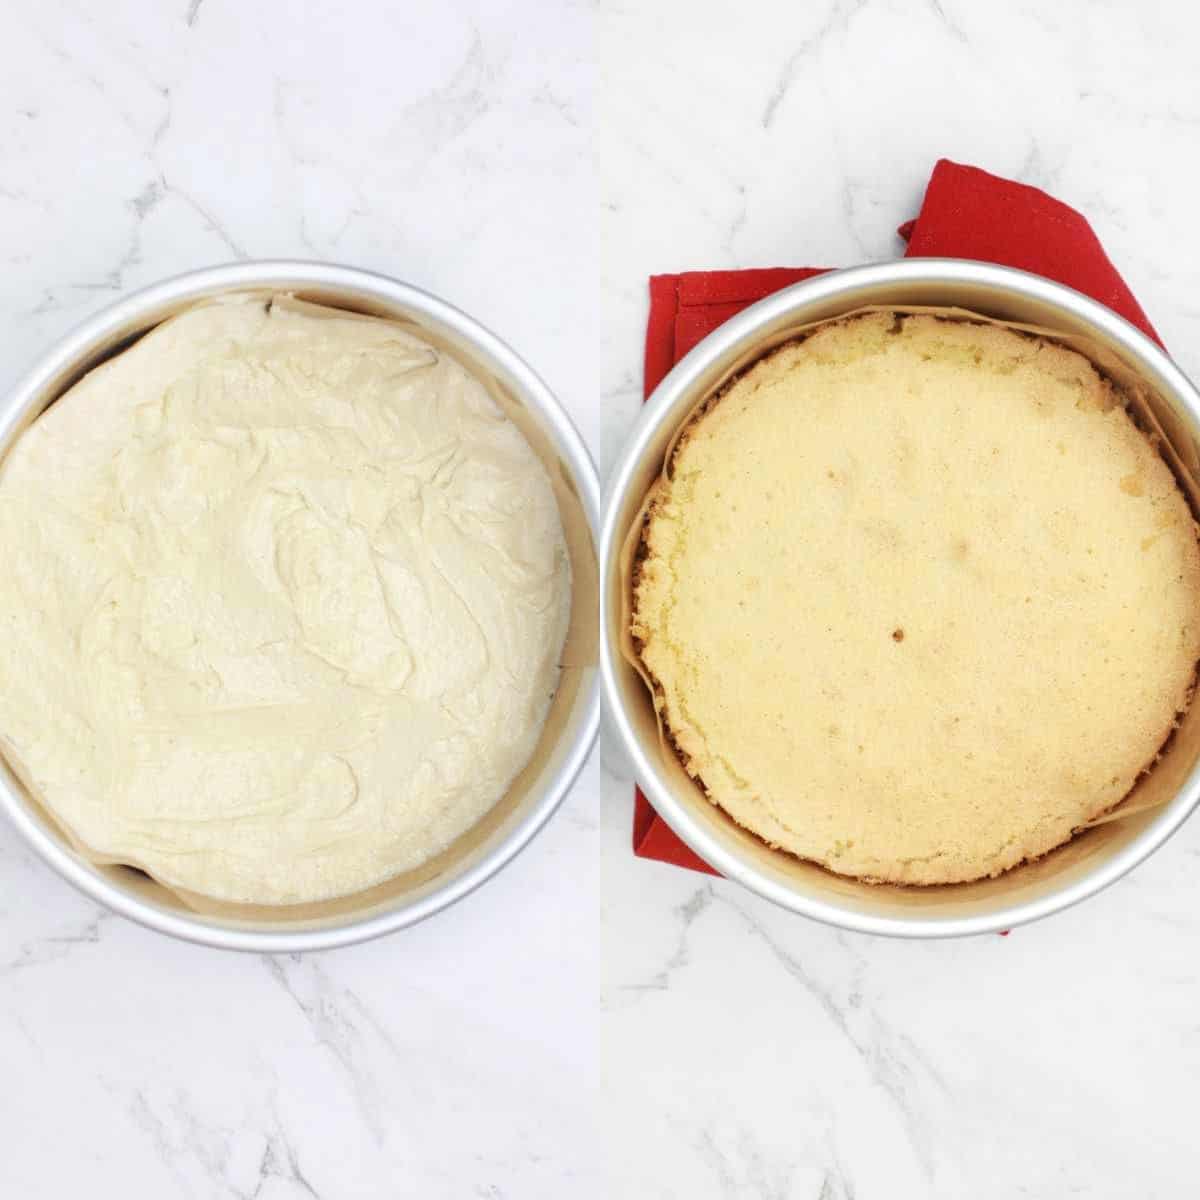 the batter in cake pan on the left and baked cake in pan on the right.